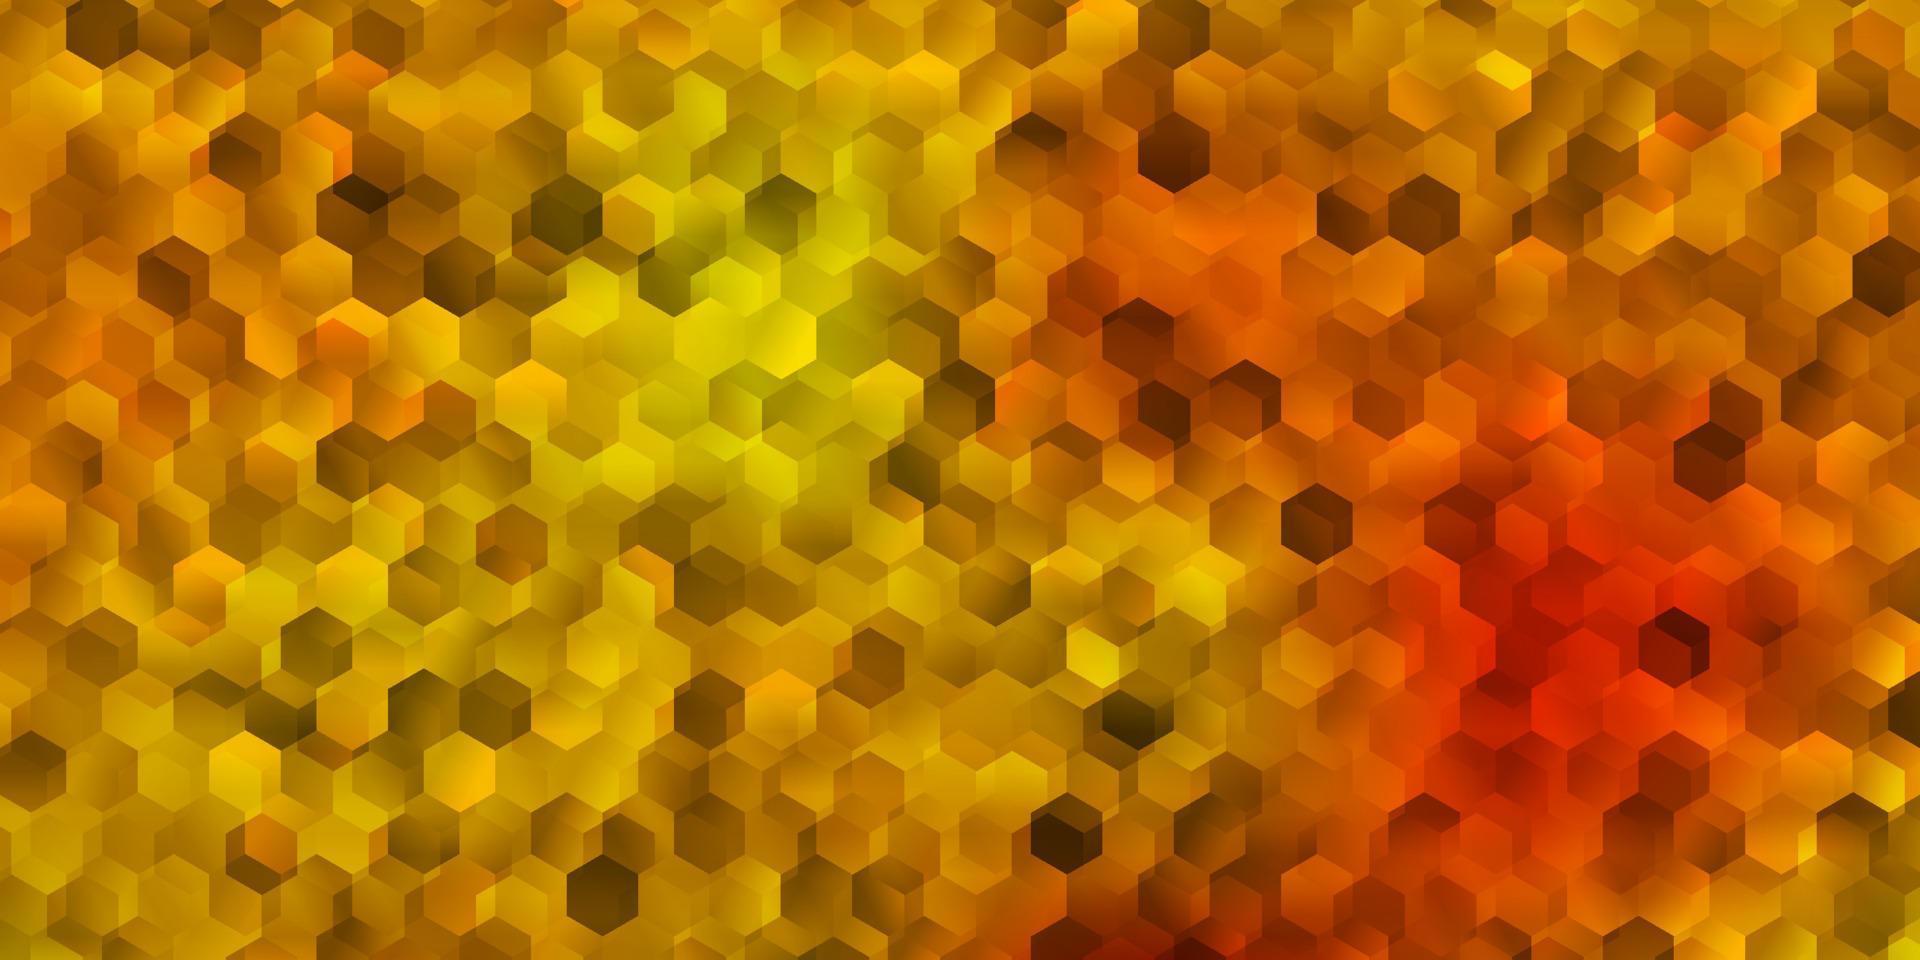 Dark yellow vector texture with colorful hexagons.